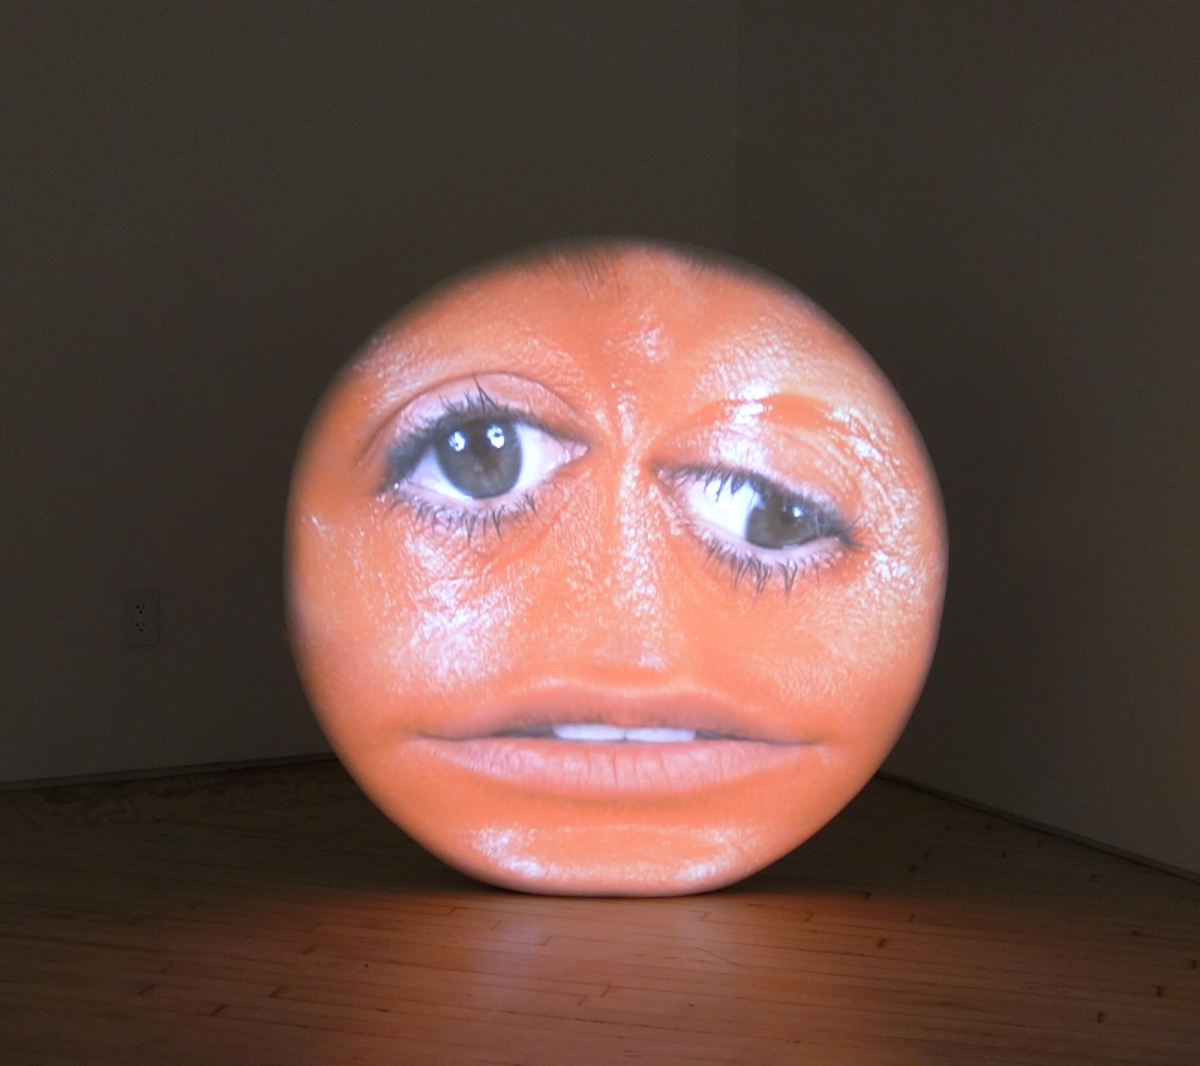 Tony Oursler, pEachhhh?, 2004, Projection on foam and resin sclupture, audio - round object in a darkened room, a round, close up head painted red is projected on the surface. The face has two eyes and a mouth, no nose.